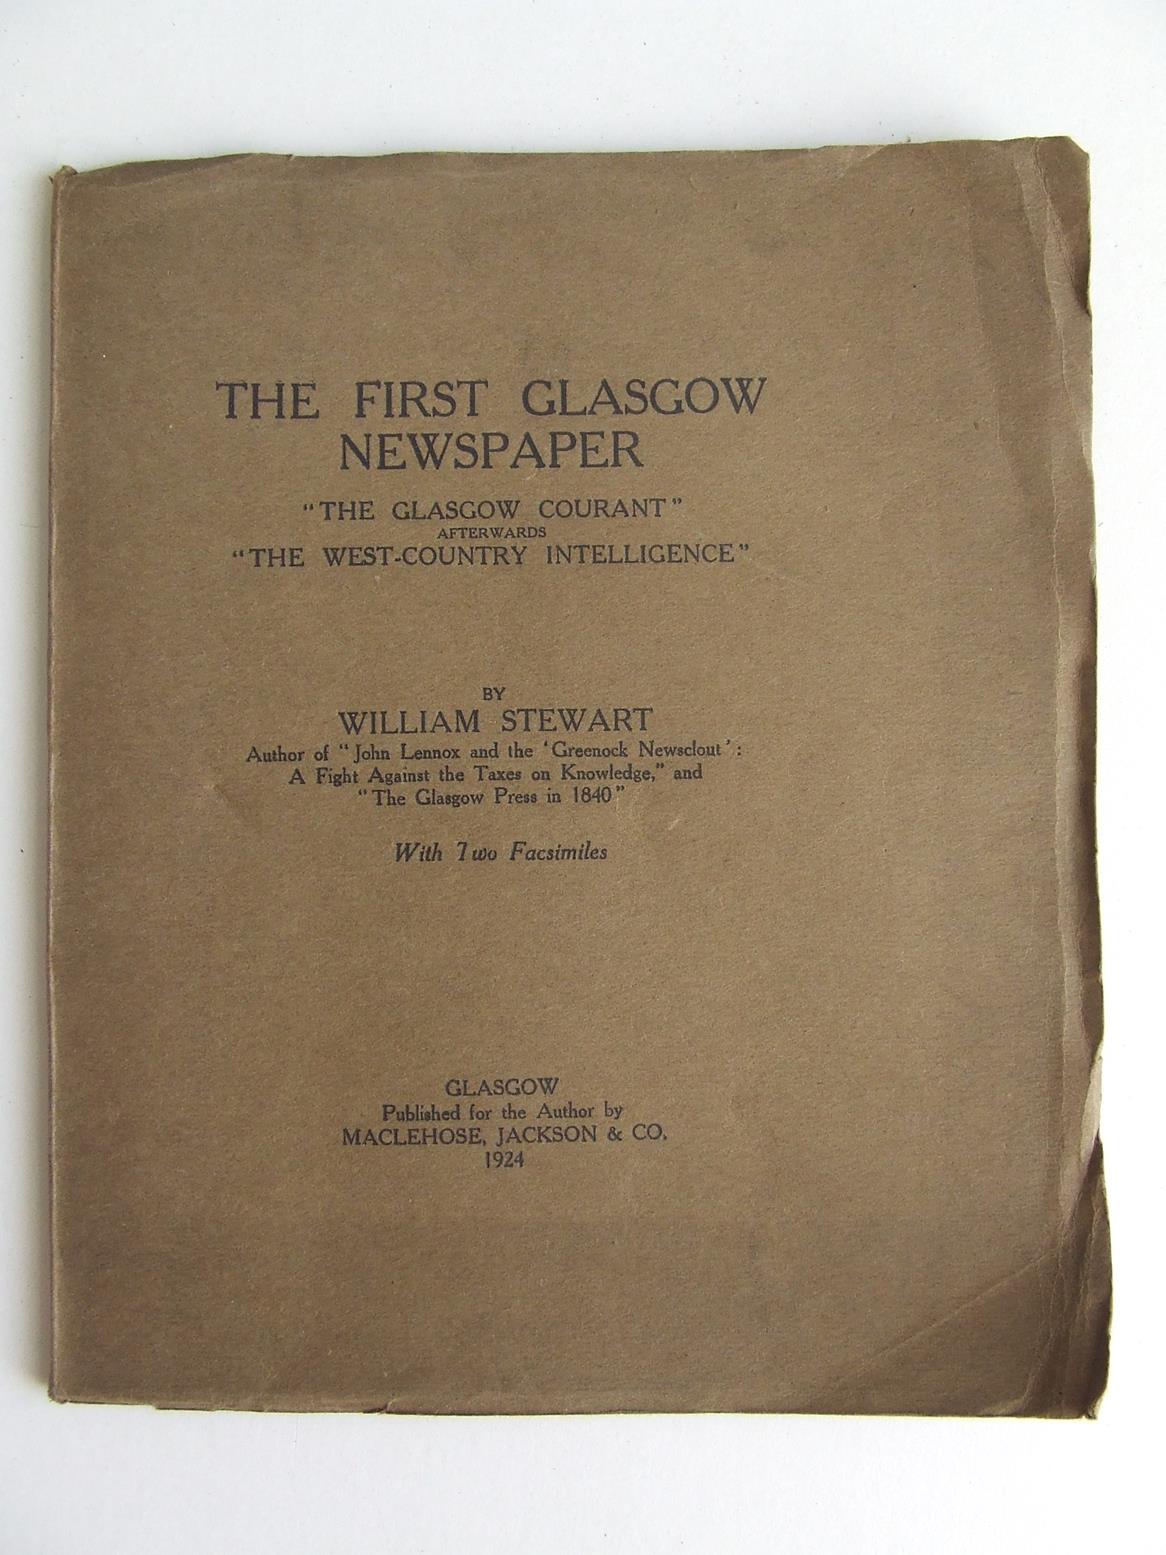 The First Glasgow Newspaper